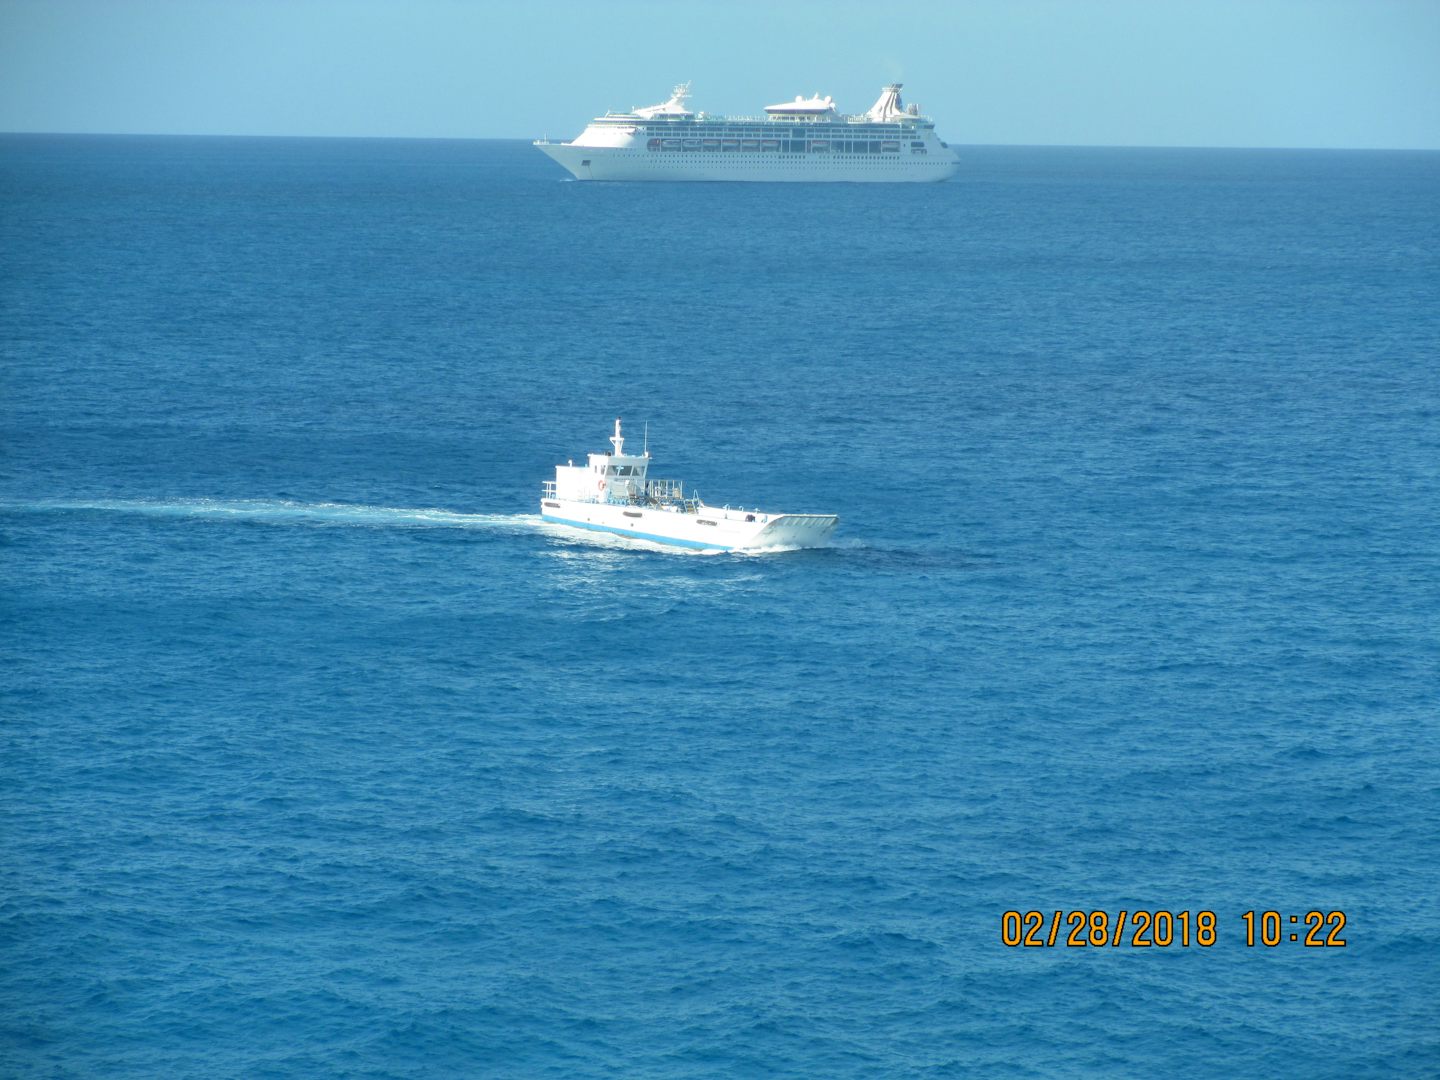 tender leaving the Breakaway for Great Stirrup Cay.